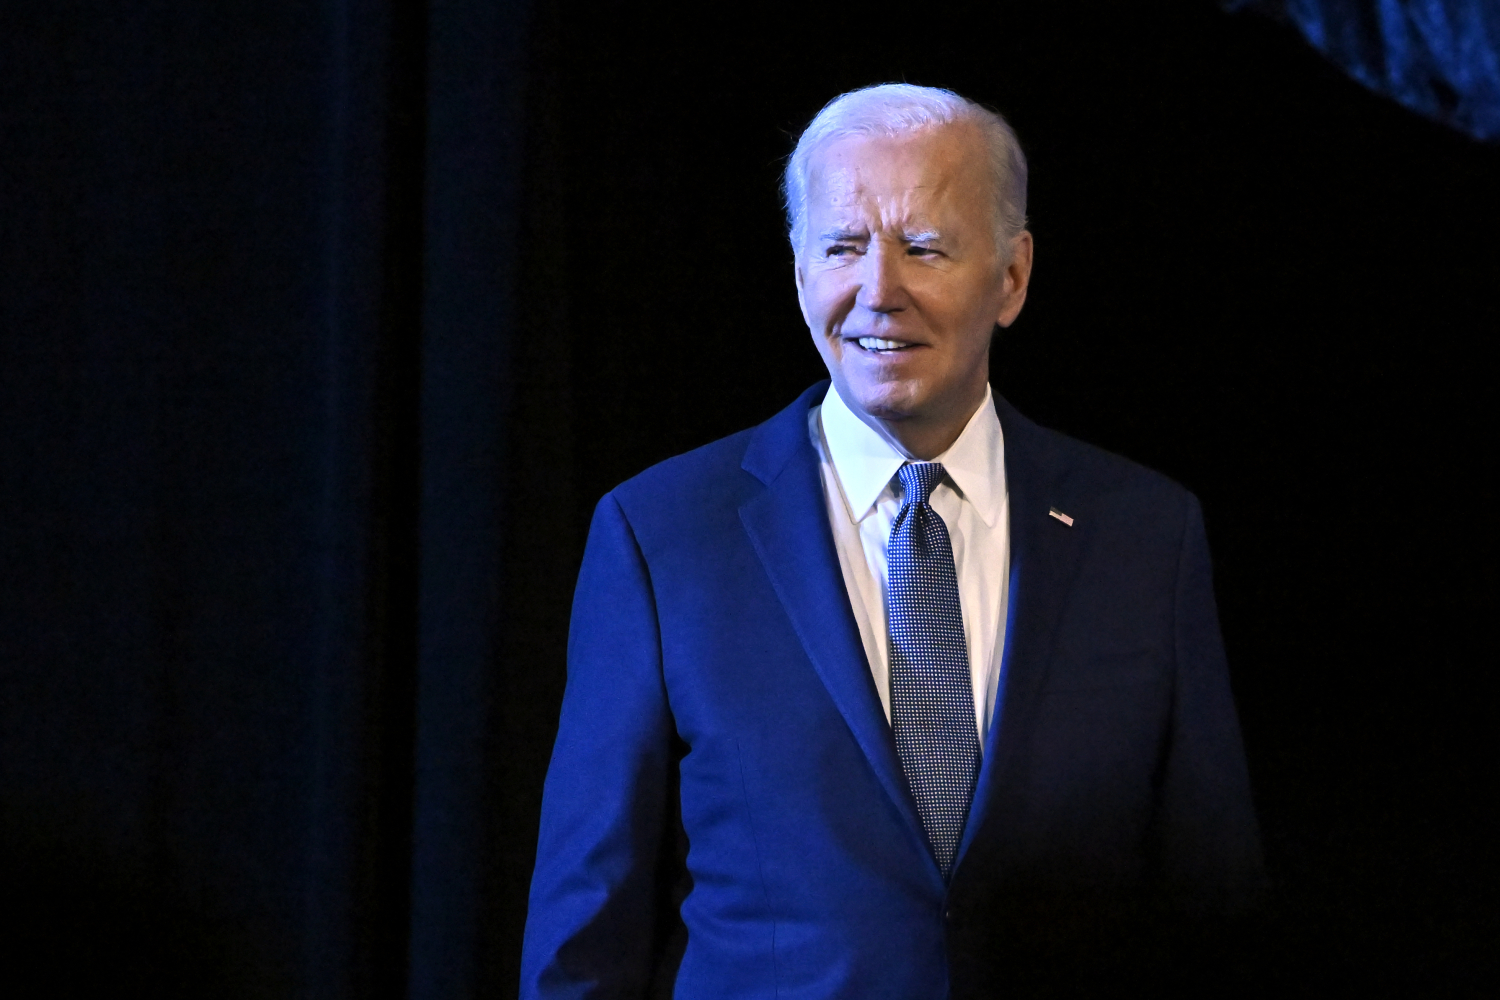 Biden Withdraws from 2024 Election, Supports Harris